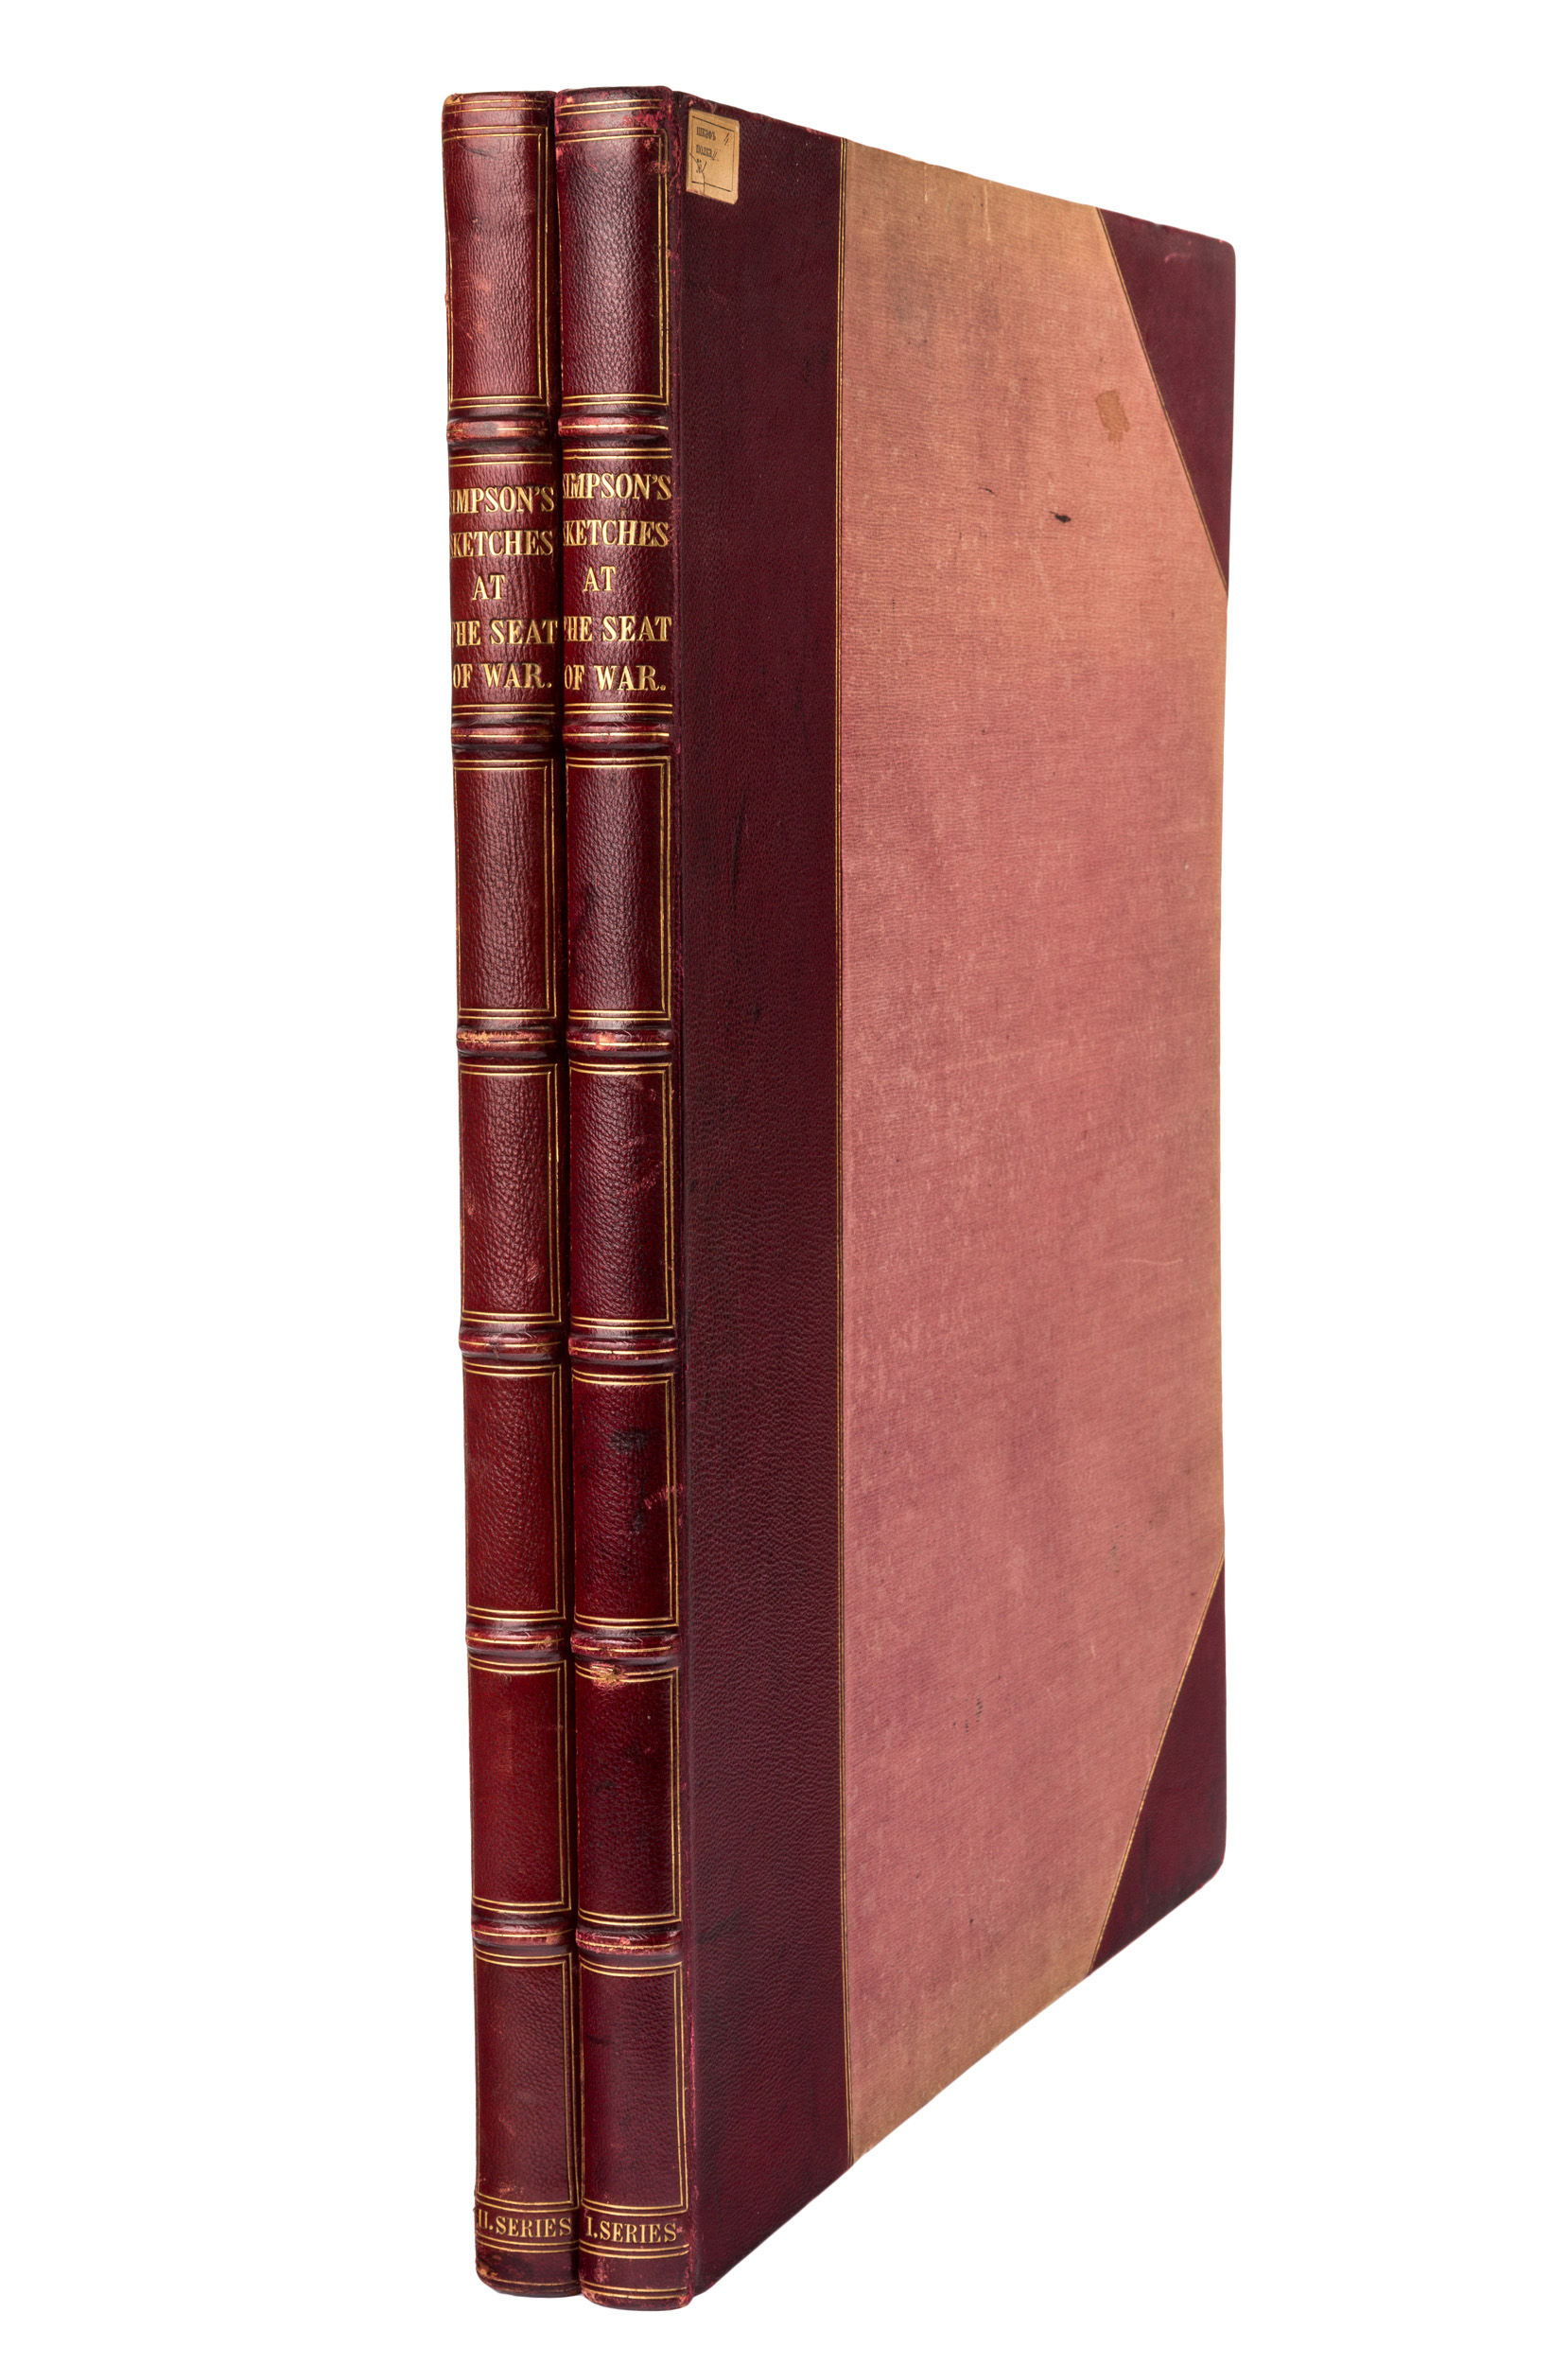 W. SIMPSON, TWO VOLUMES FROM THE LIBRARY OF GRAND DUKE NIKOLAI ALEKSANDROVICH